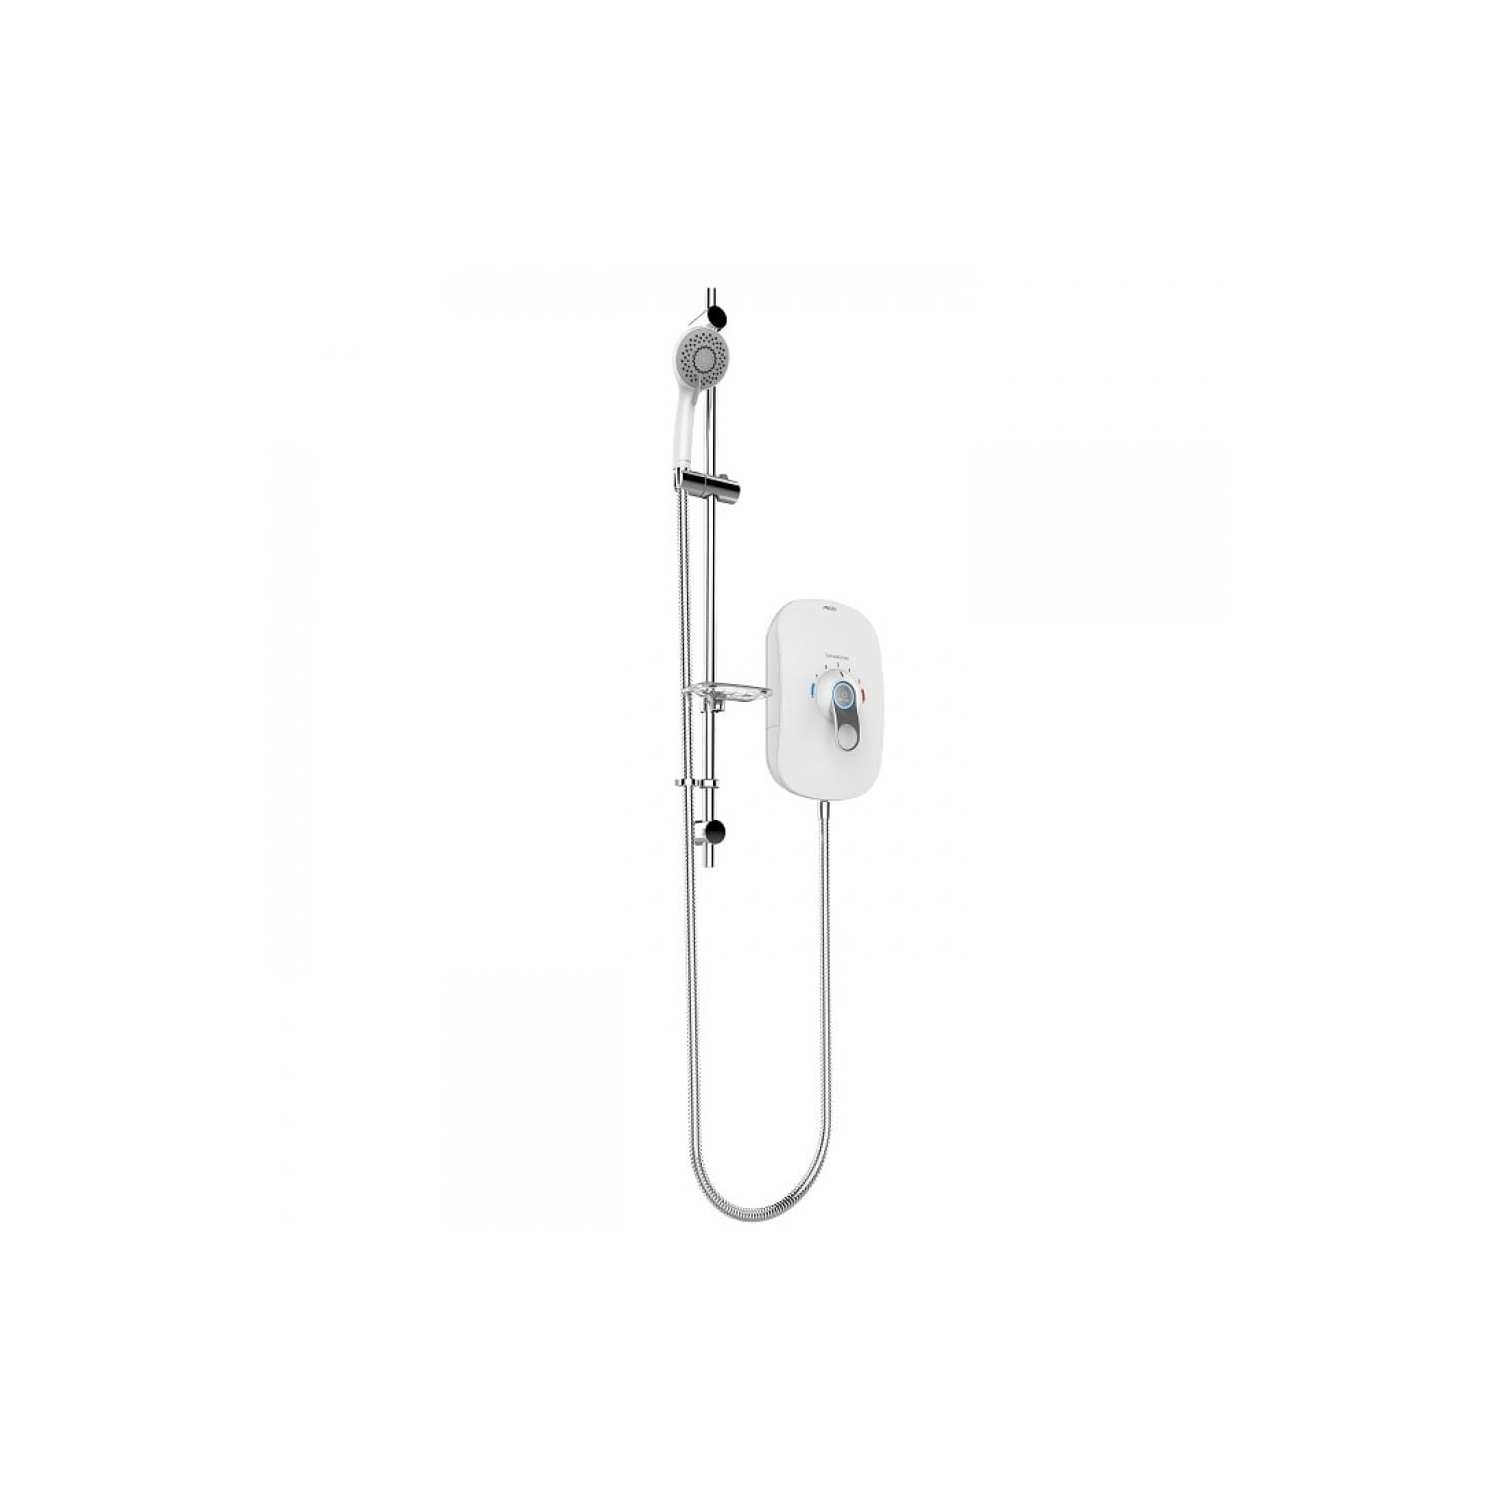 AKW Smartcare 9.5kw Electric Shower with Lever